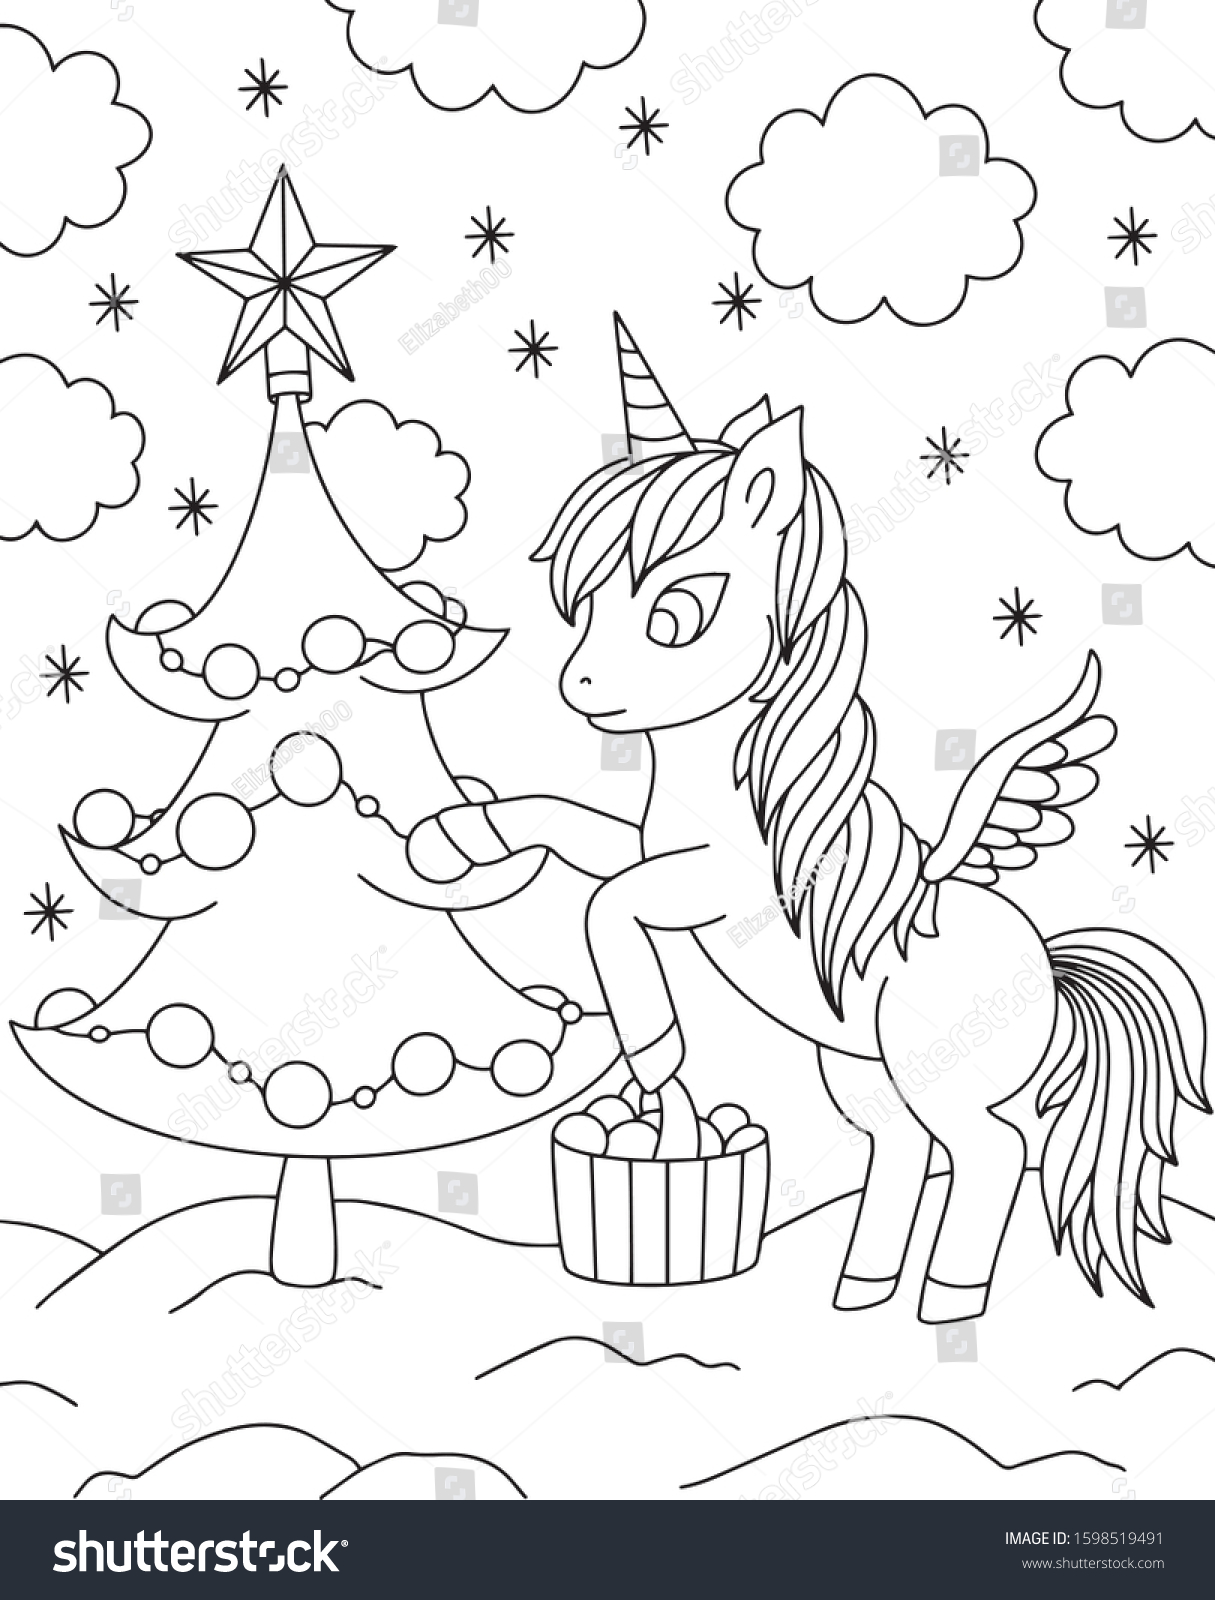 Merry Christmas Unicorn Coloring Hand Drawn Stock Vector Royalty ...